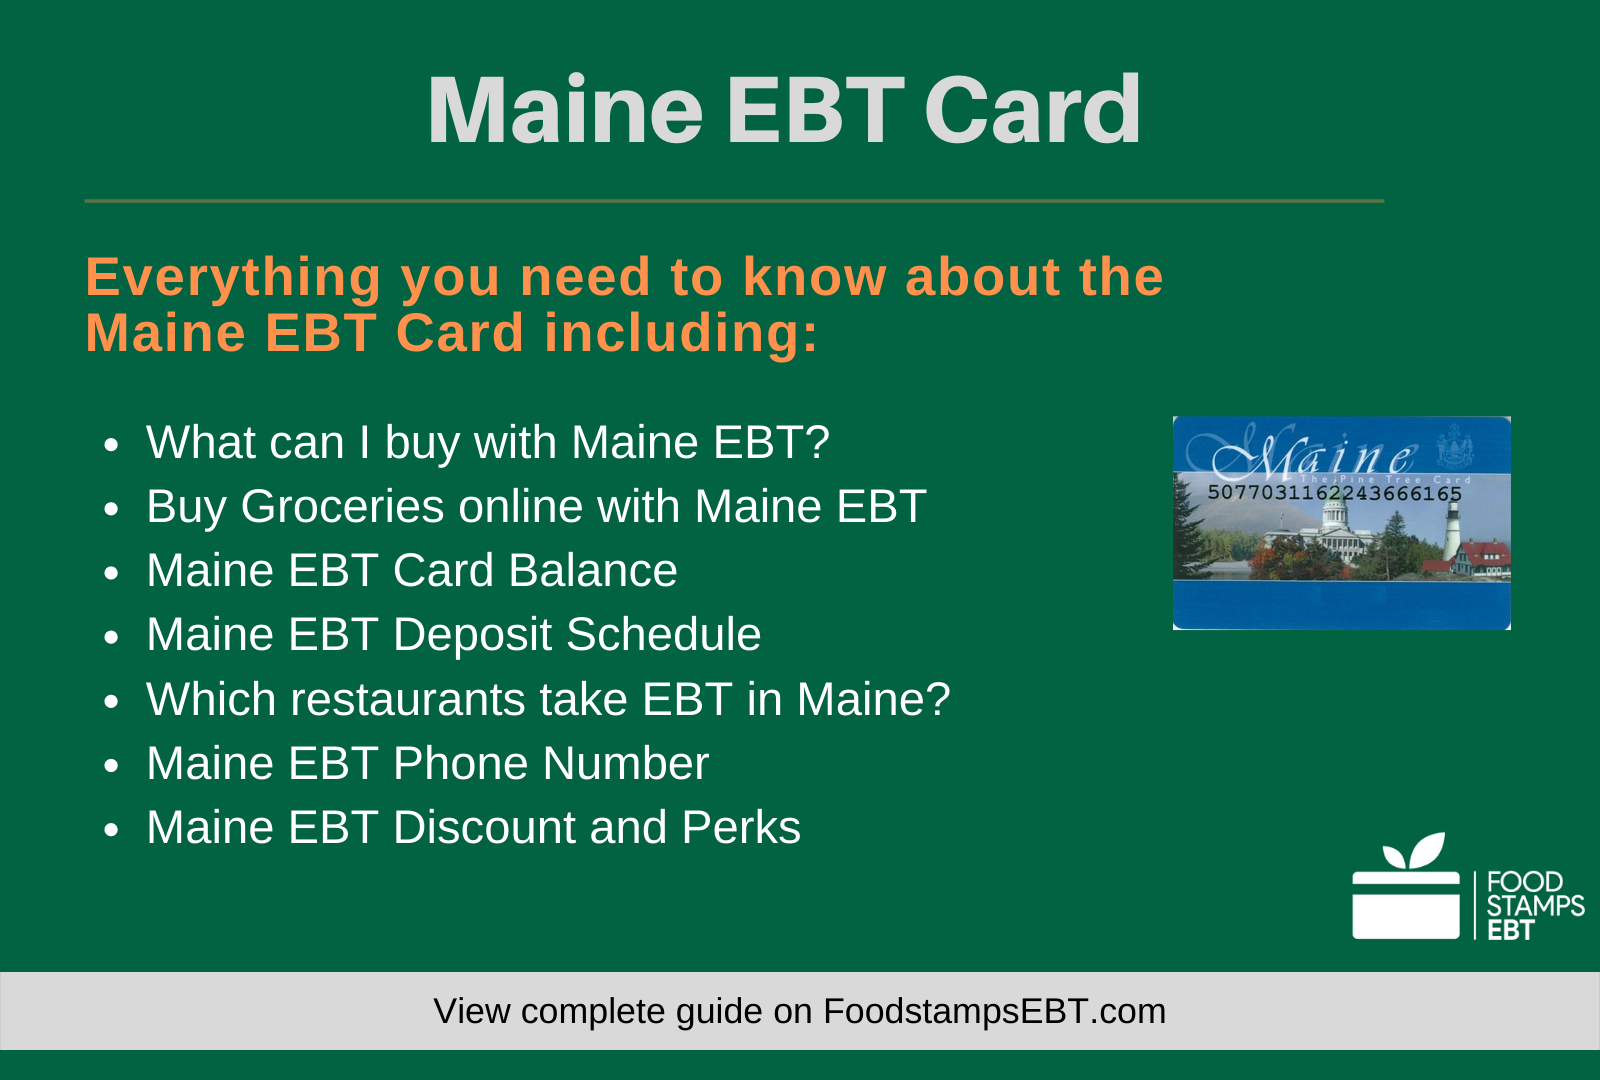 "Maine EBT Card Questions and Answers"